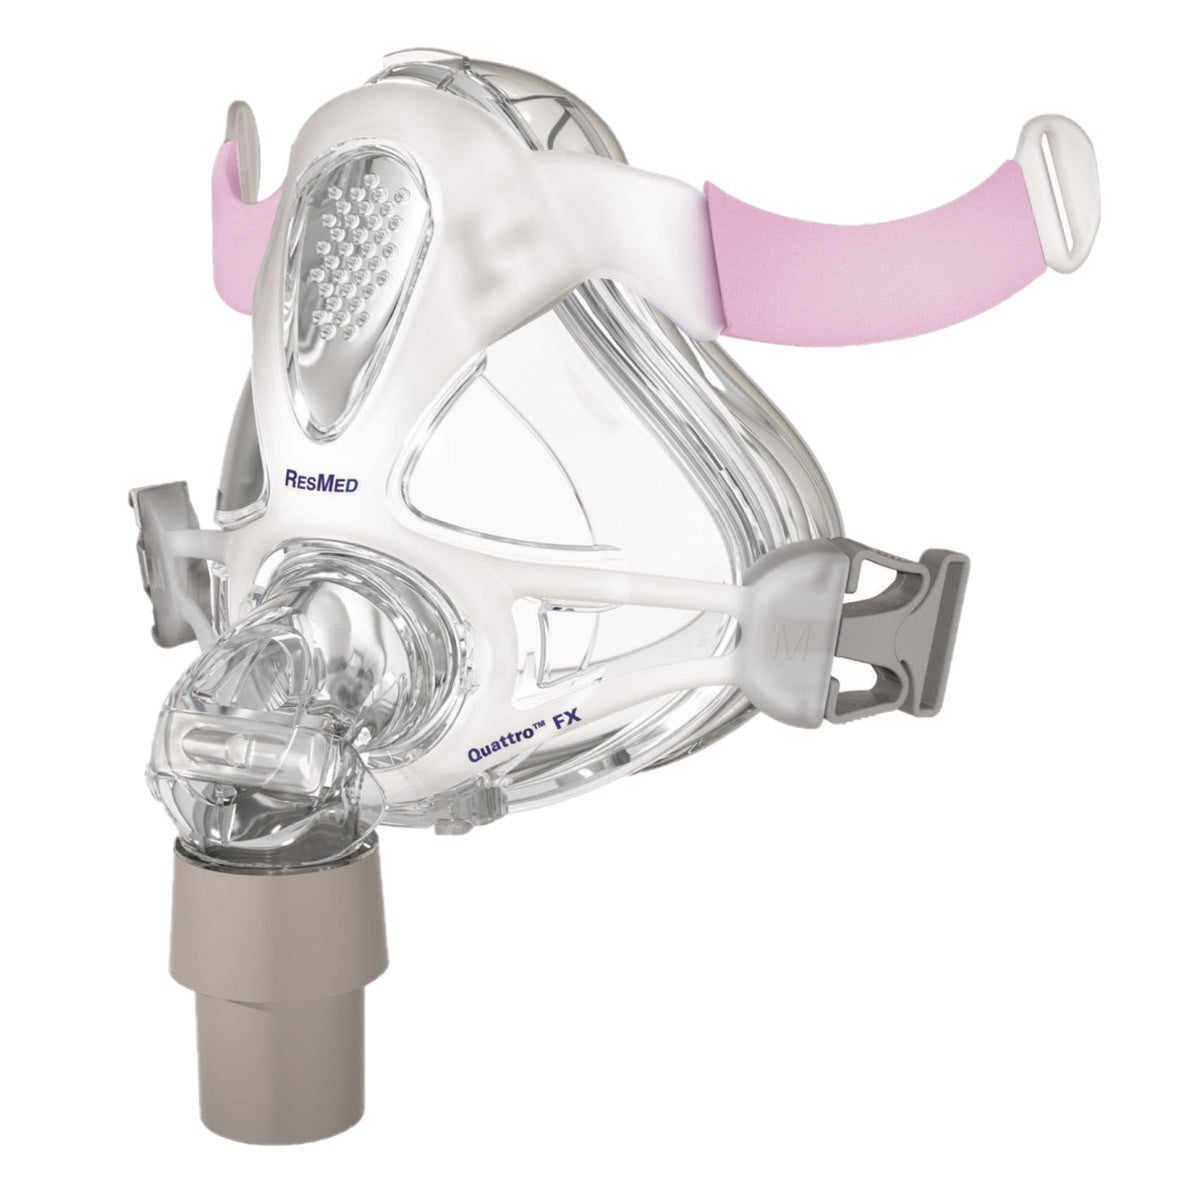 Resmed Quattro FX for Her Full Face Mask System with Headgear